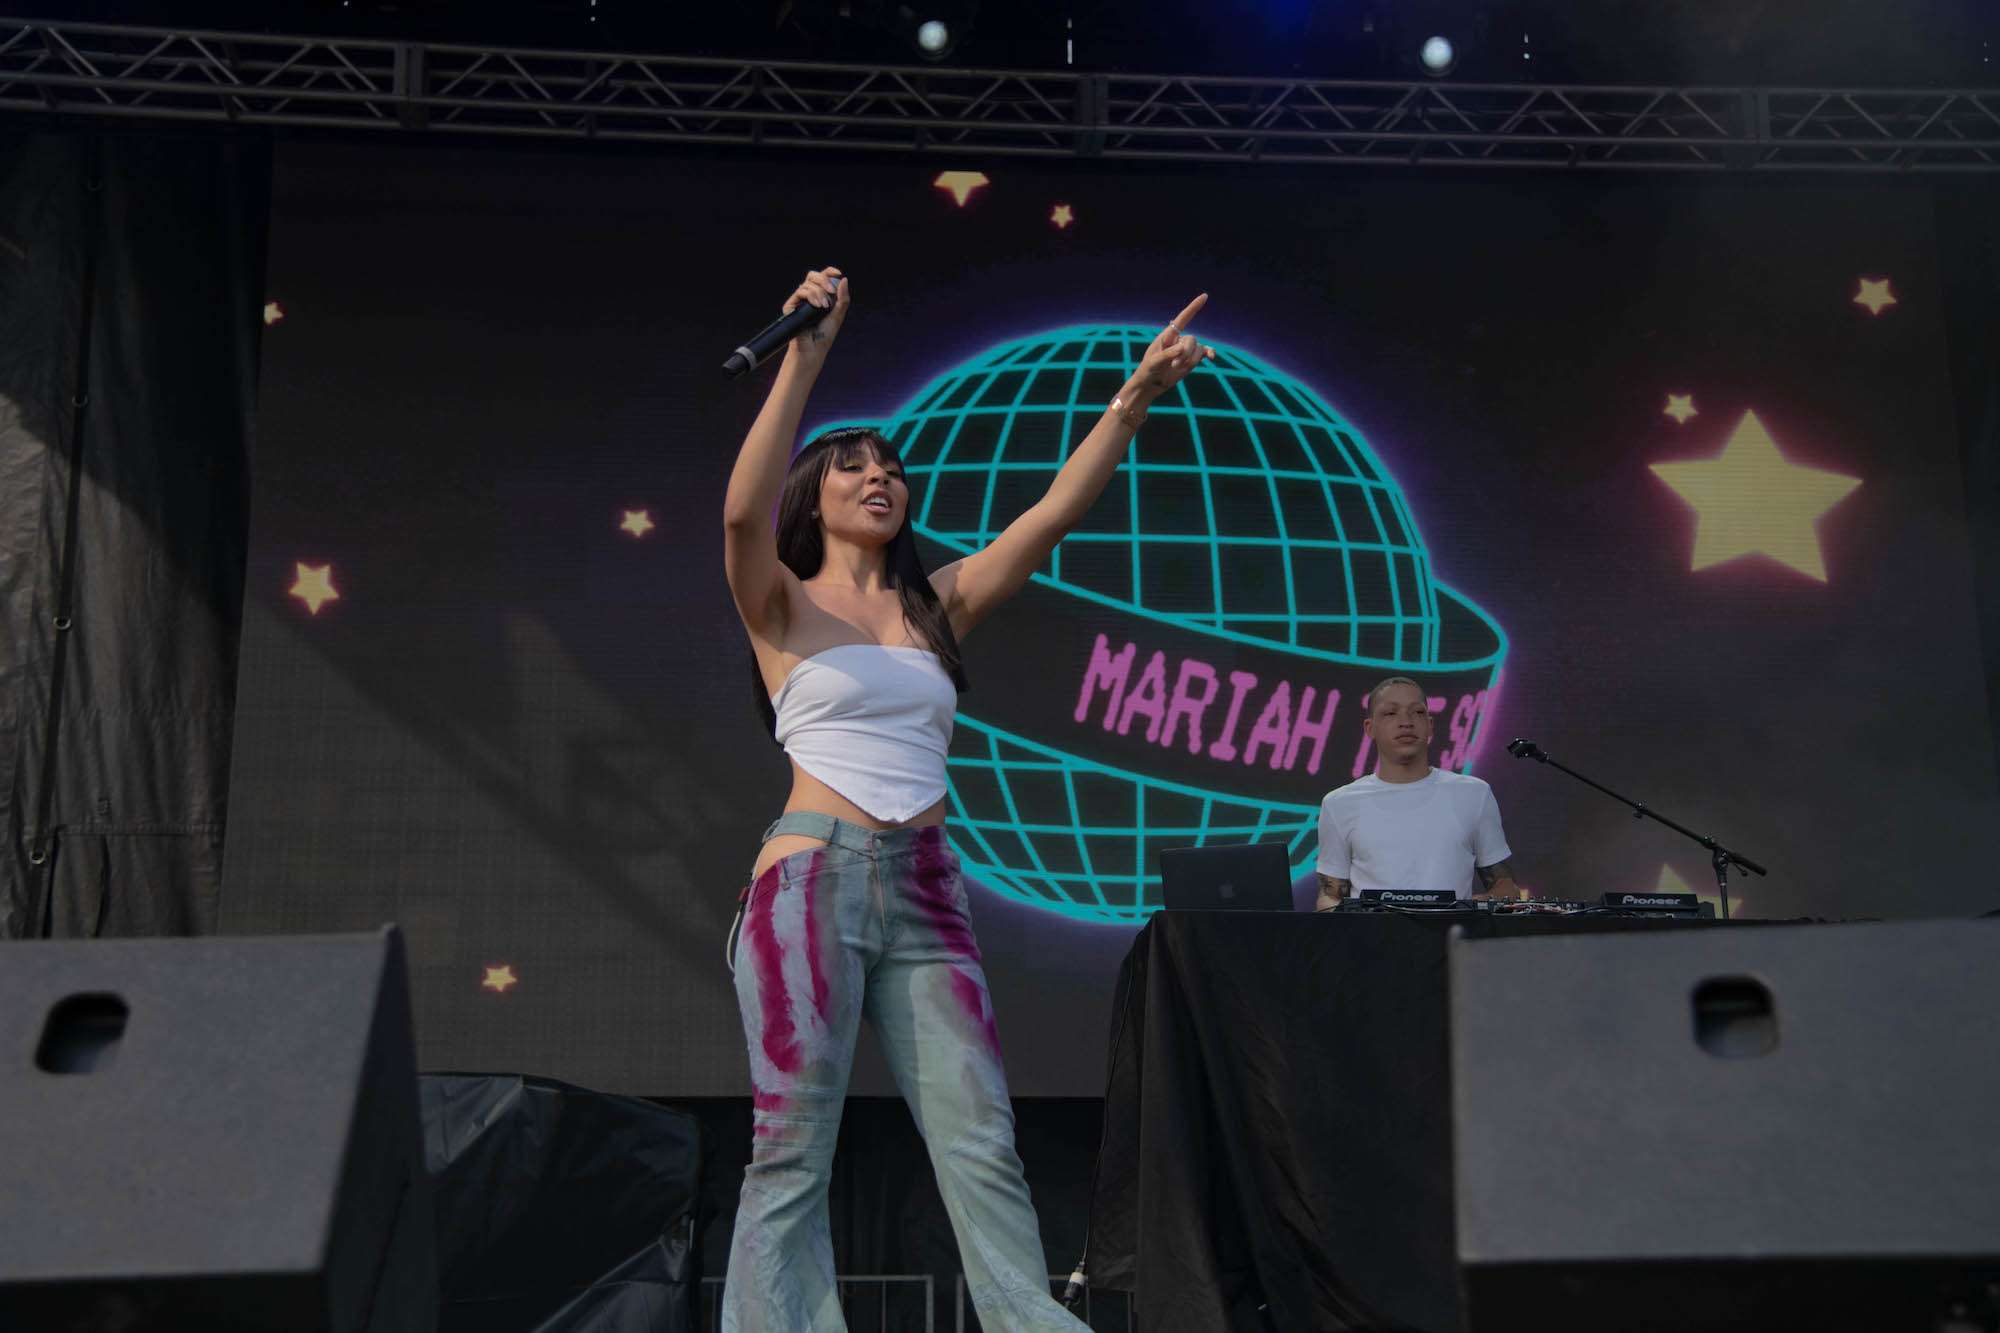 Mariah The Scientist Live at Pitchfork [GALLERY] 2